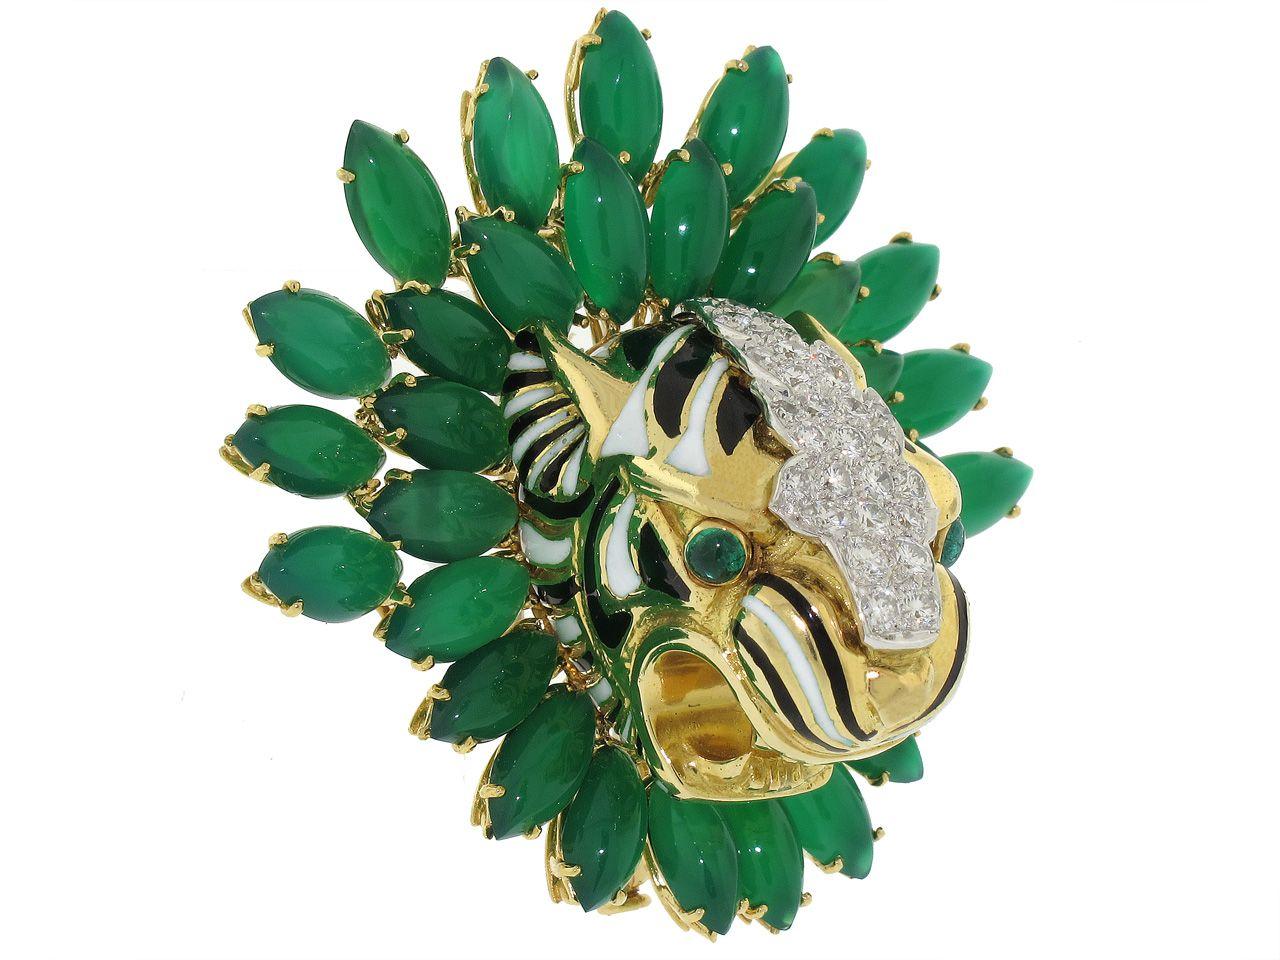 Stunning Tiger Head Brooch created by David Webb featuring marquise green onyx, cabochon emeralds, approximately 0.99 carats of brilliant-cut diamonds, set in 18K yellow gold and platinum.

W: 2inches

Excellent condition.